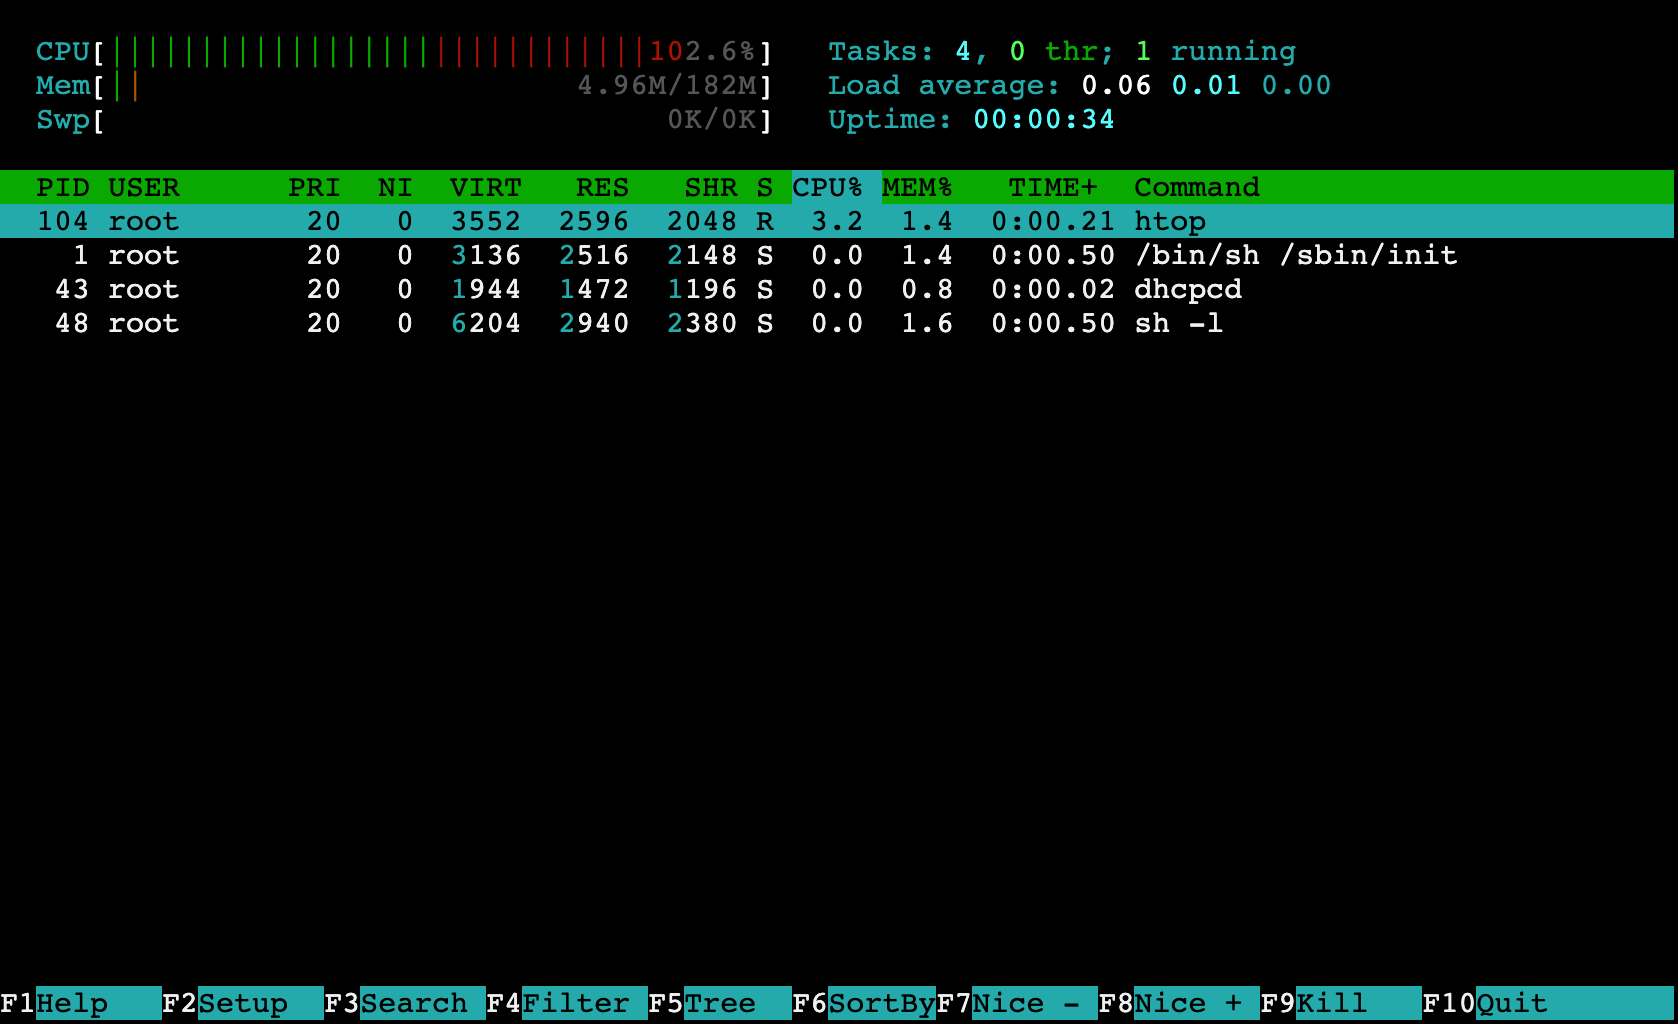 A screenshot of the htop utility